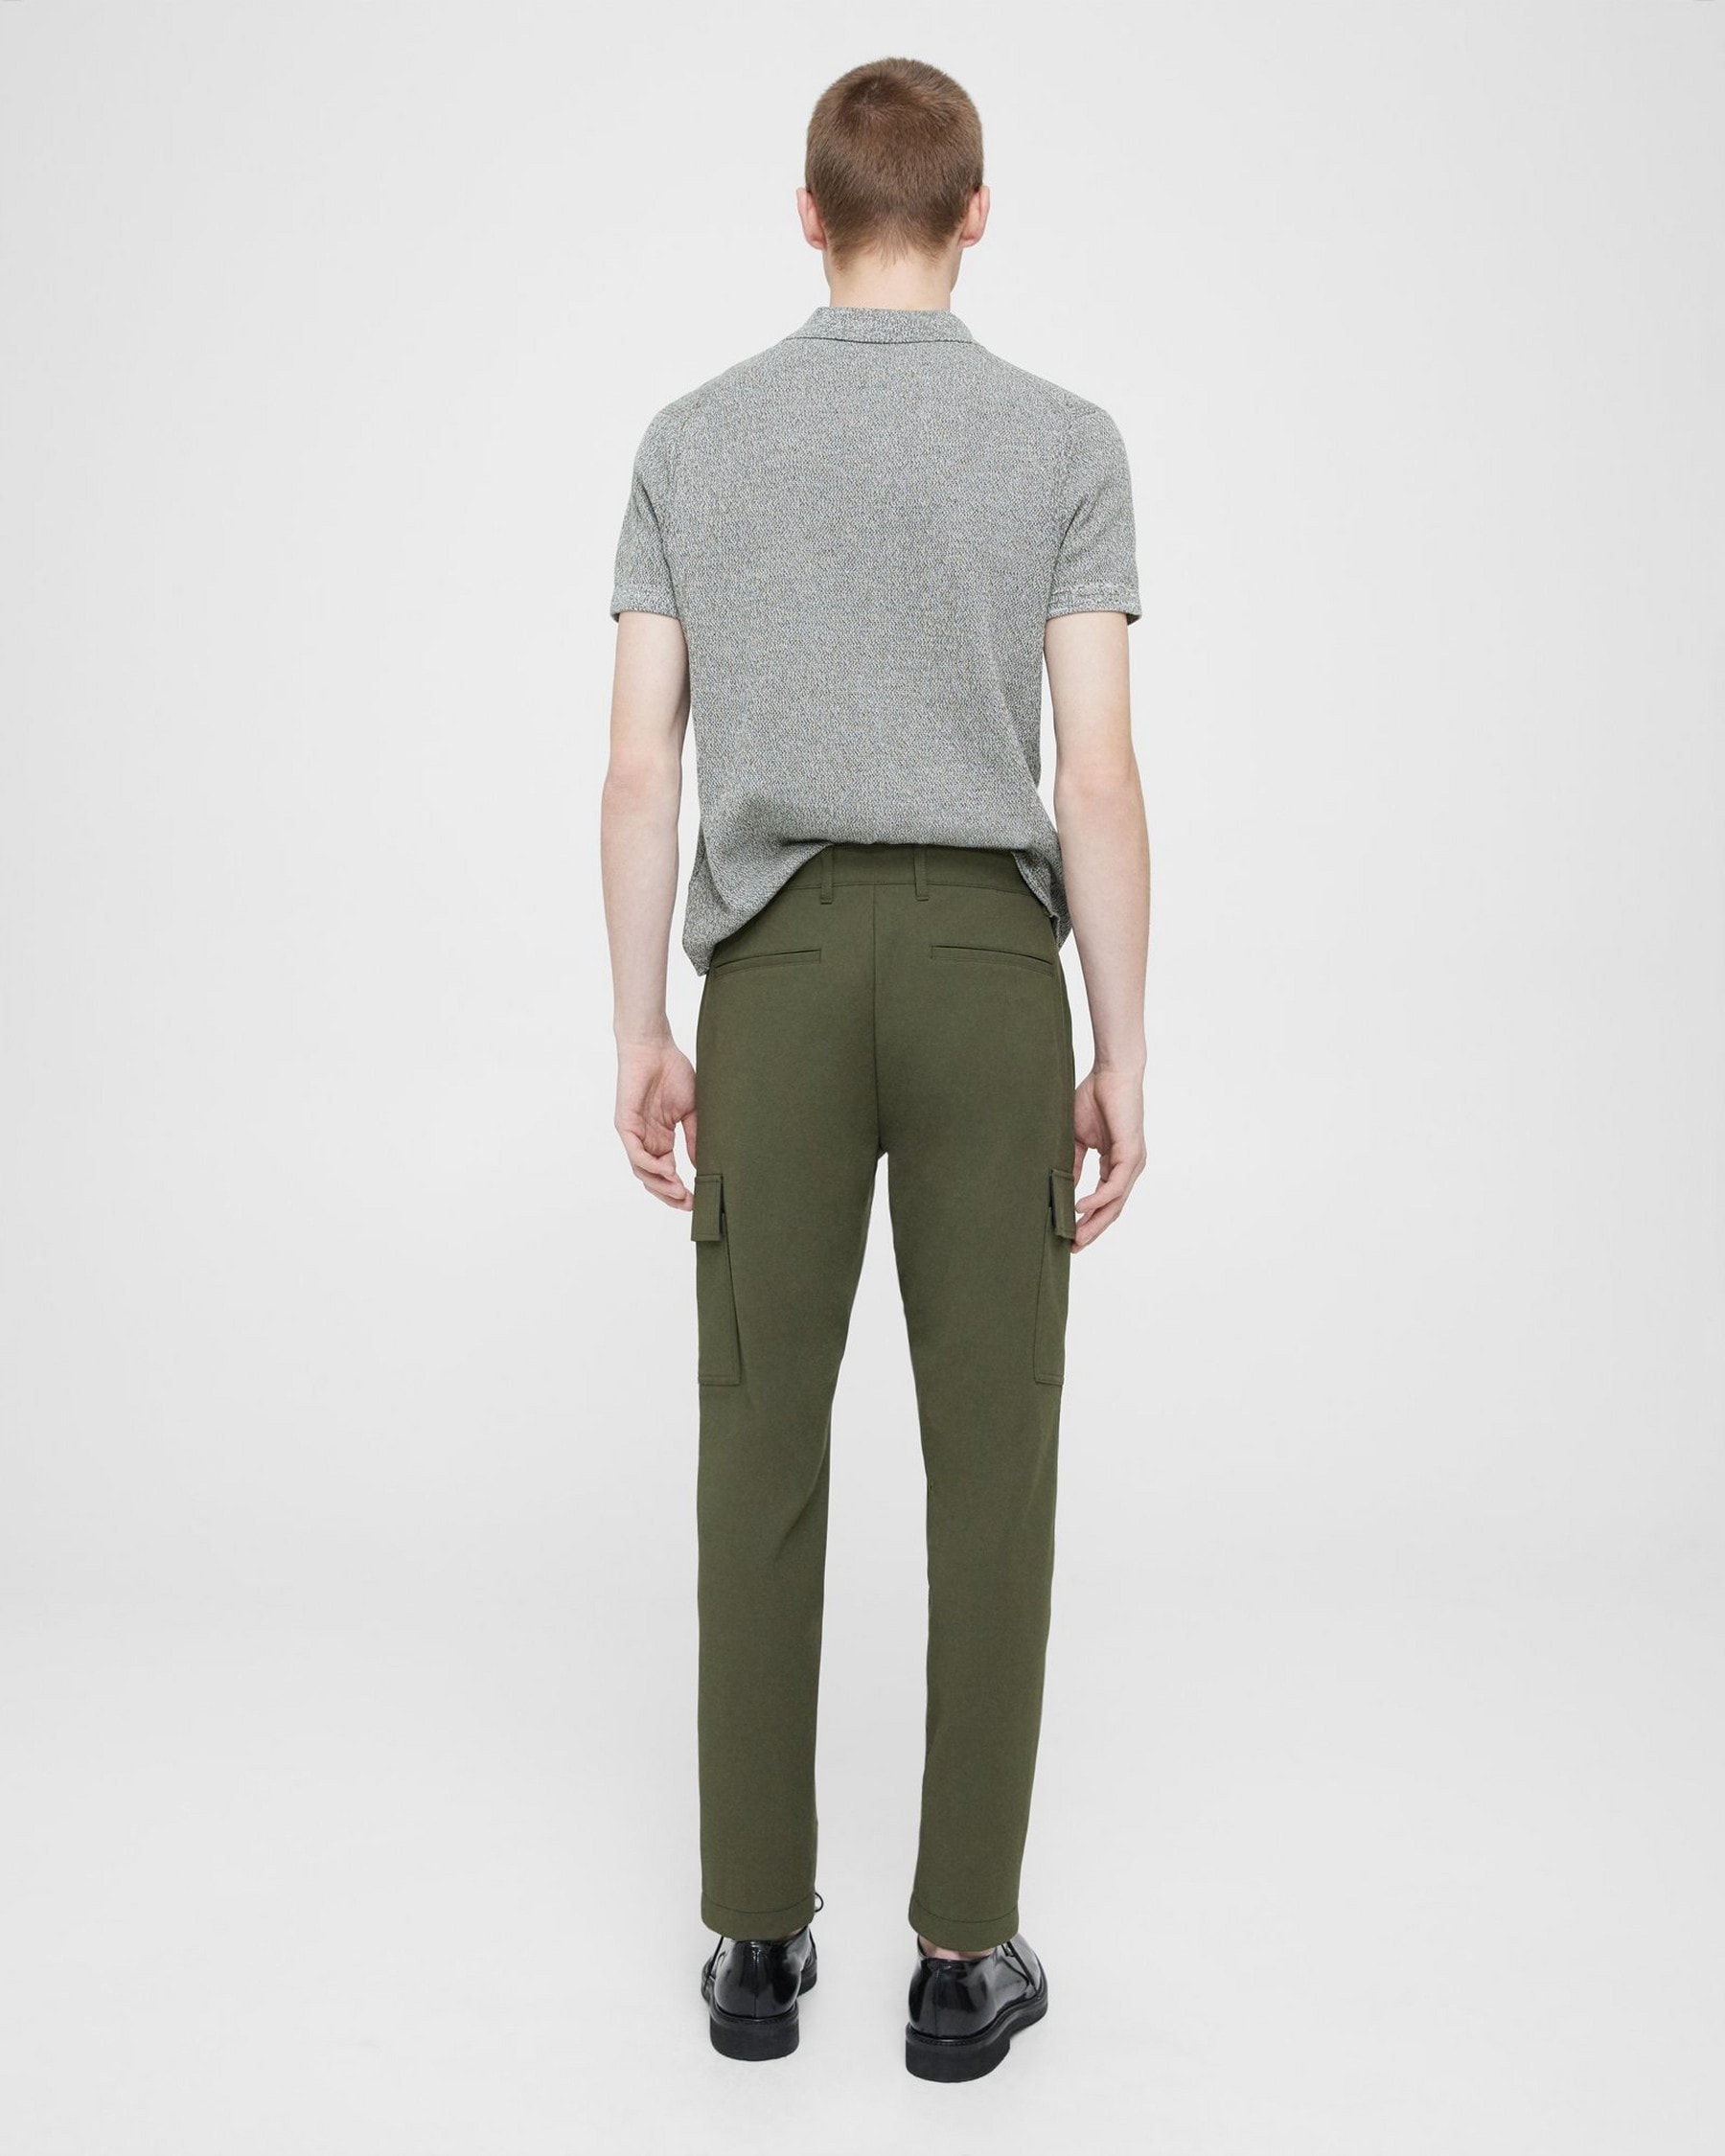 Zaine Cargo Pant in Neoteric Twill